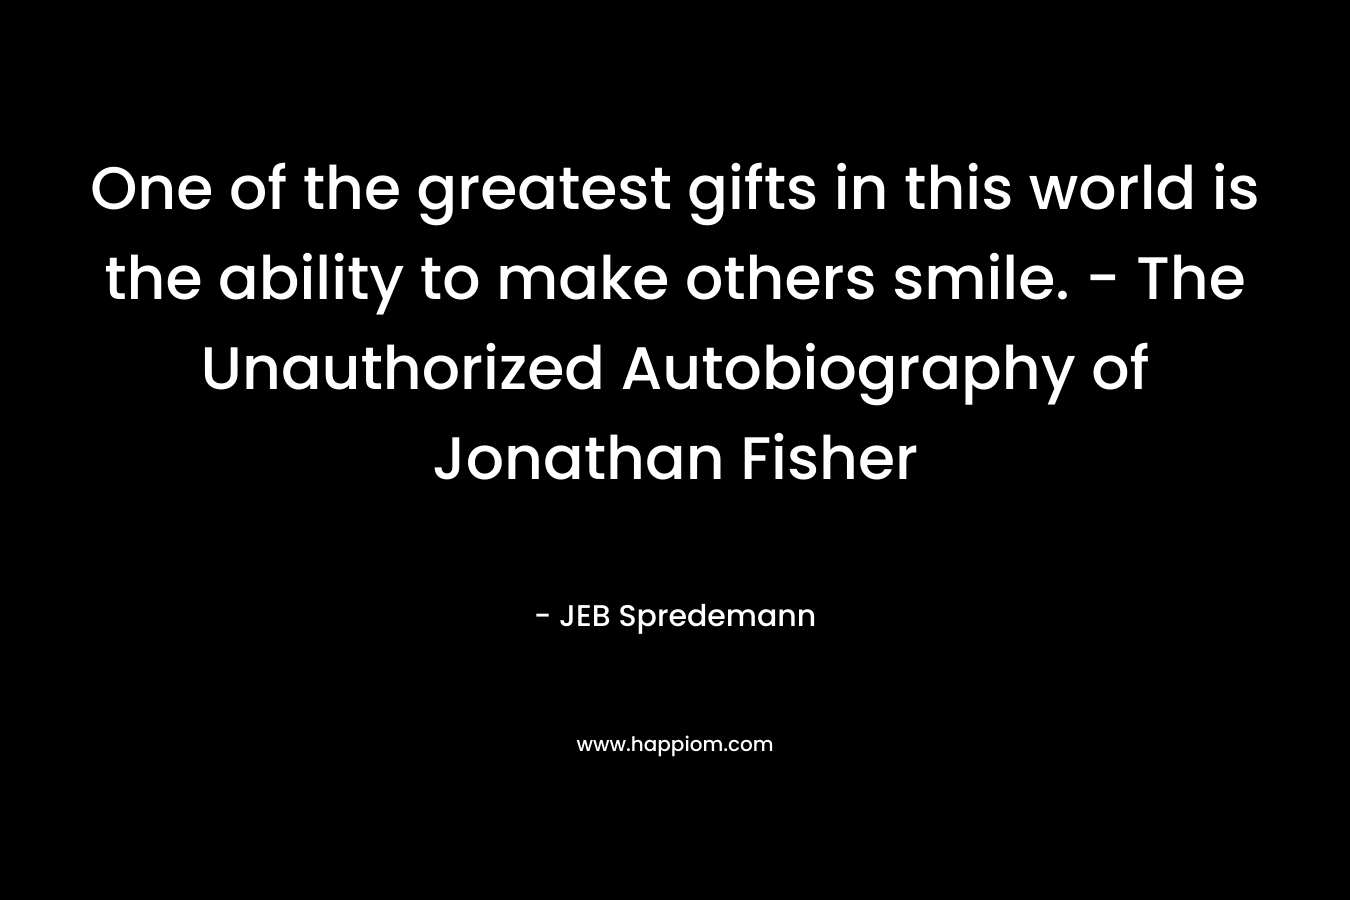 One of the greatest gifts in this world is the ability to make others smile. - The Unauthorized Autobiography of Jonathan Fisher